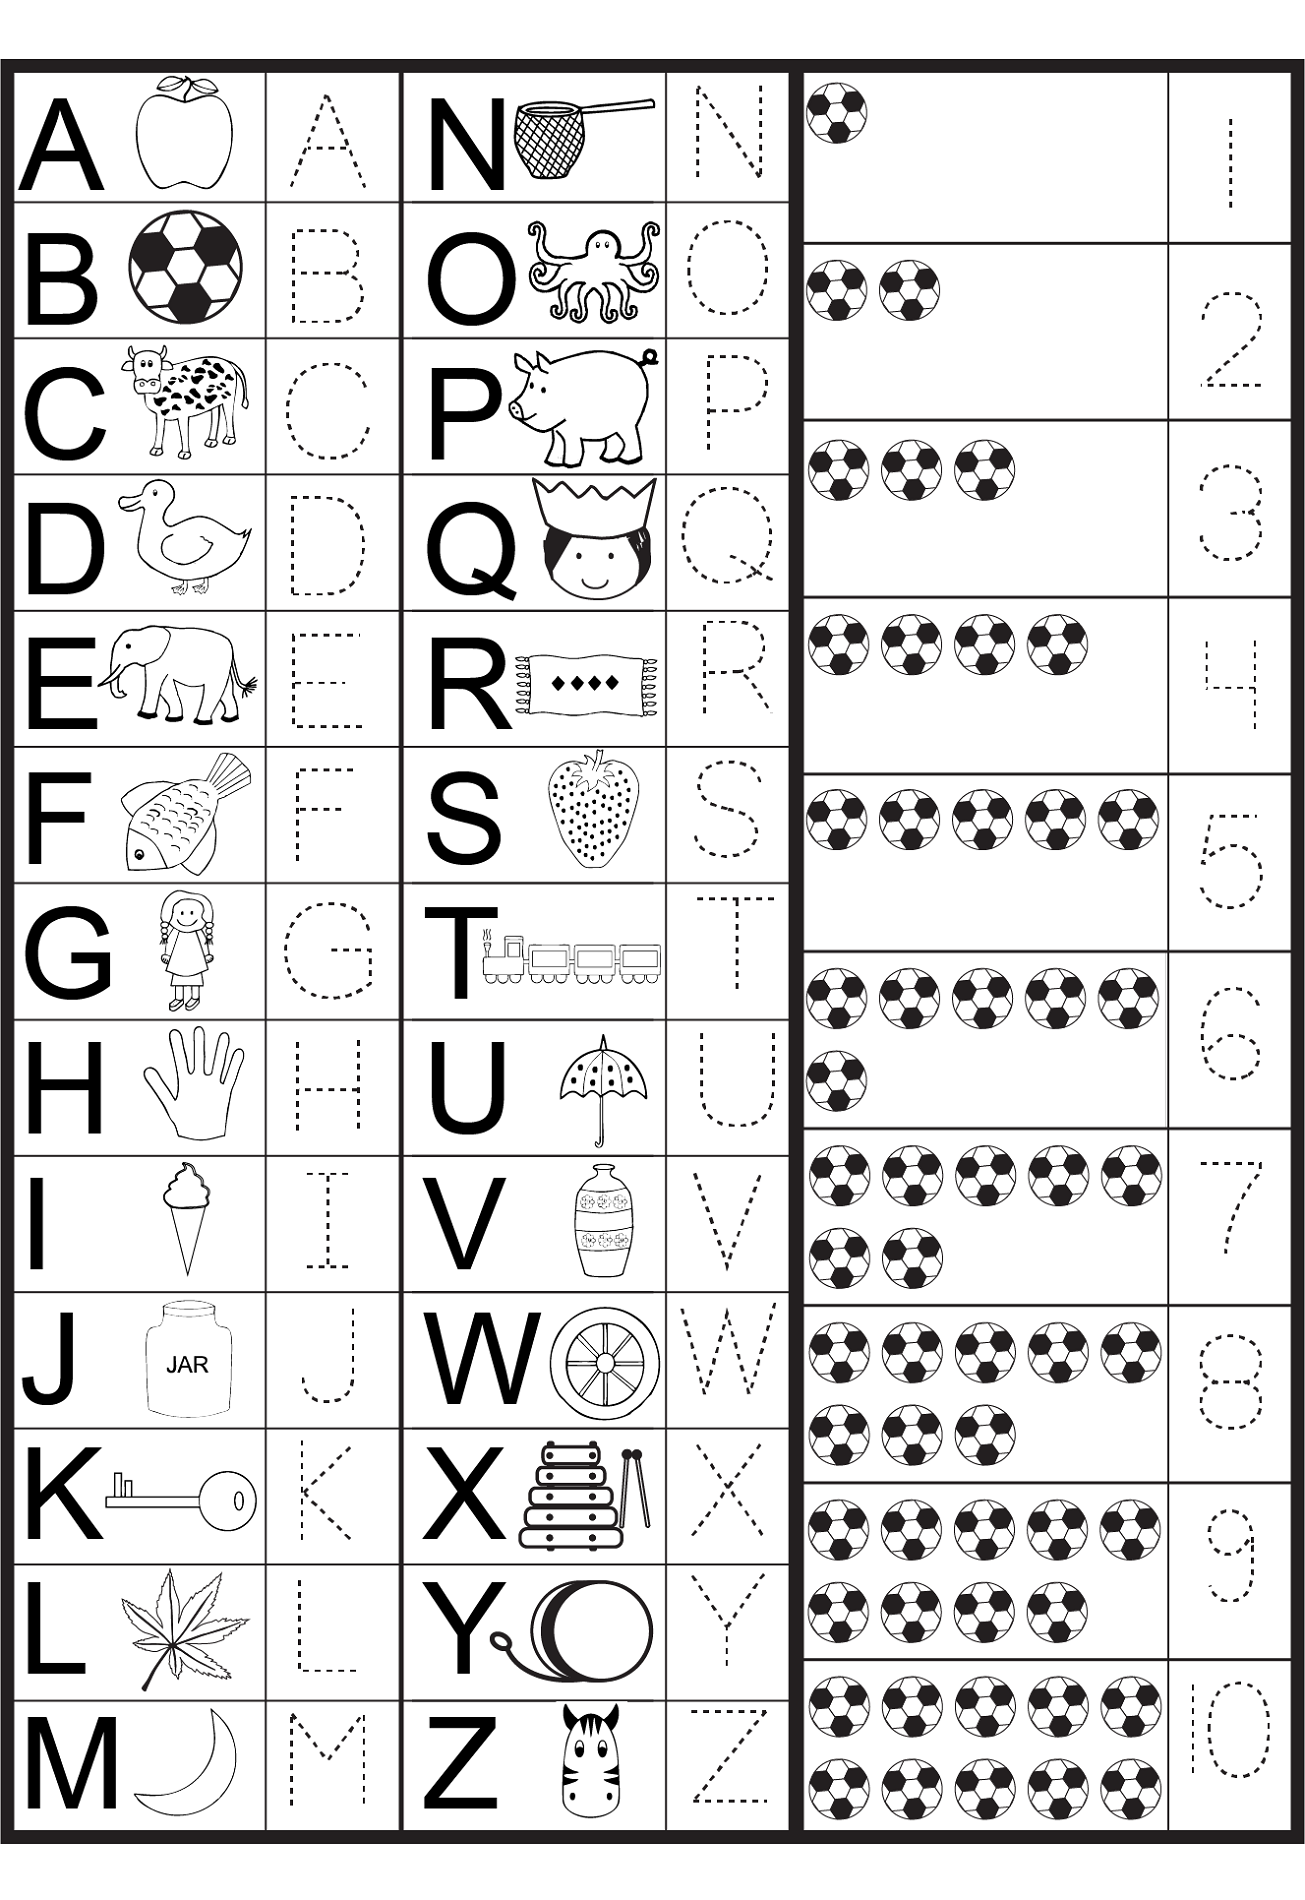 Printable ABC Traceable Worksheets Activity Shelter